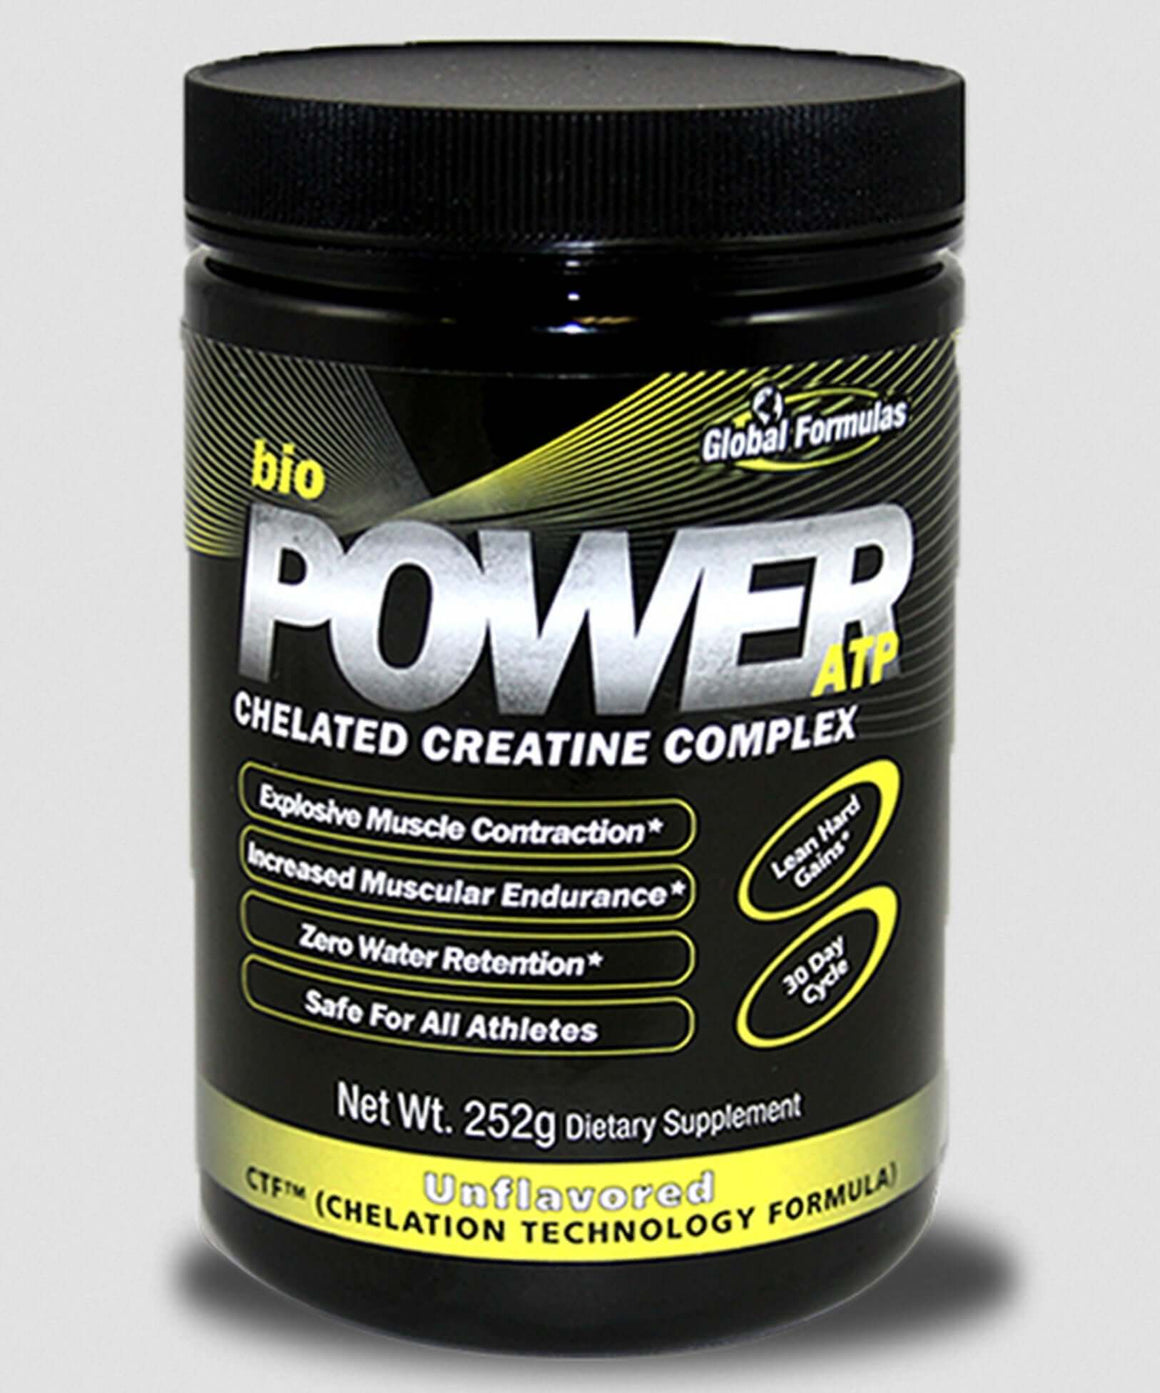 Global Formulas - bioPOWER Creatine bioPOWER ATP EXPLOSIVE MUSCLE CONTRACTION bioPOWER ATP is the ultimate creatine transport system, formulated to achieve optimal assimilation into the muscle cell while eliminating the need to consume insulin spiking sug